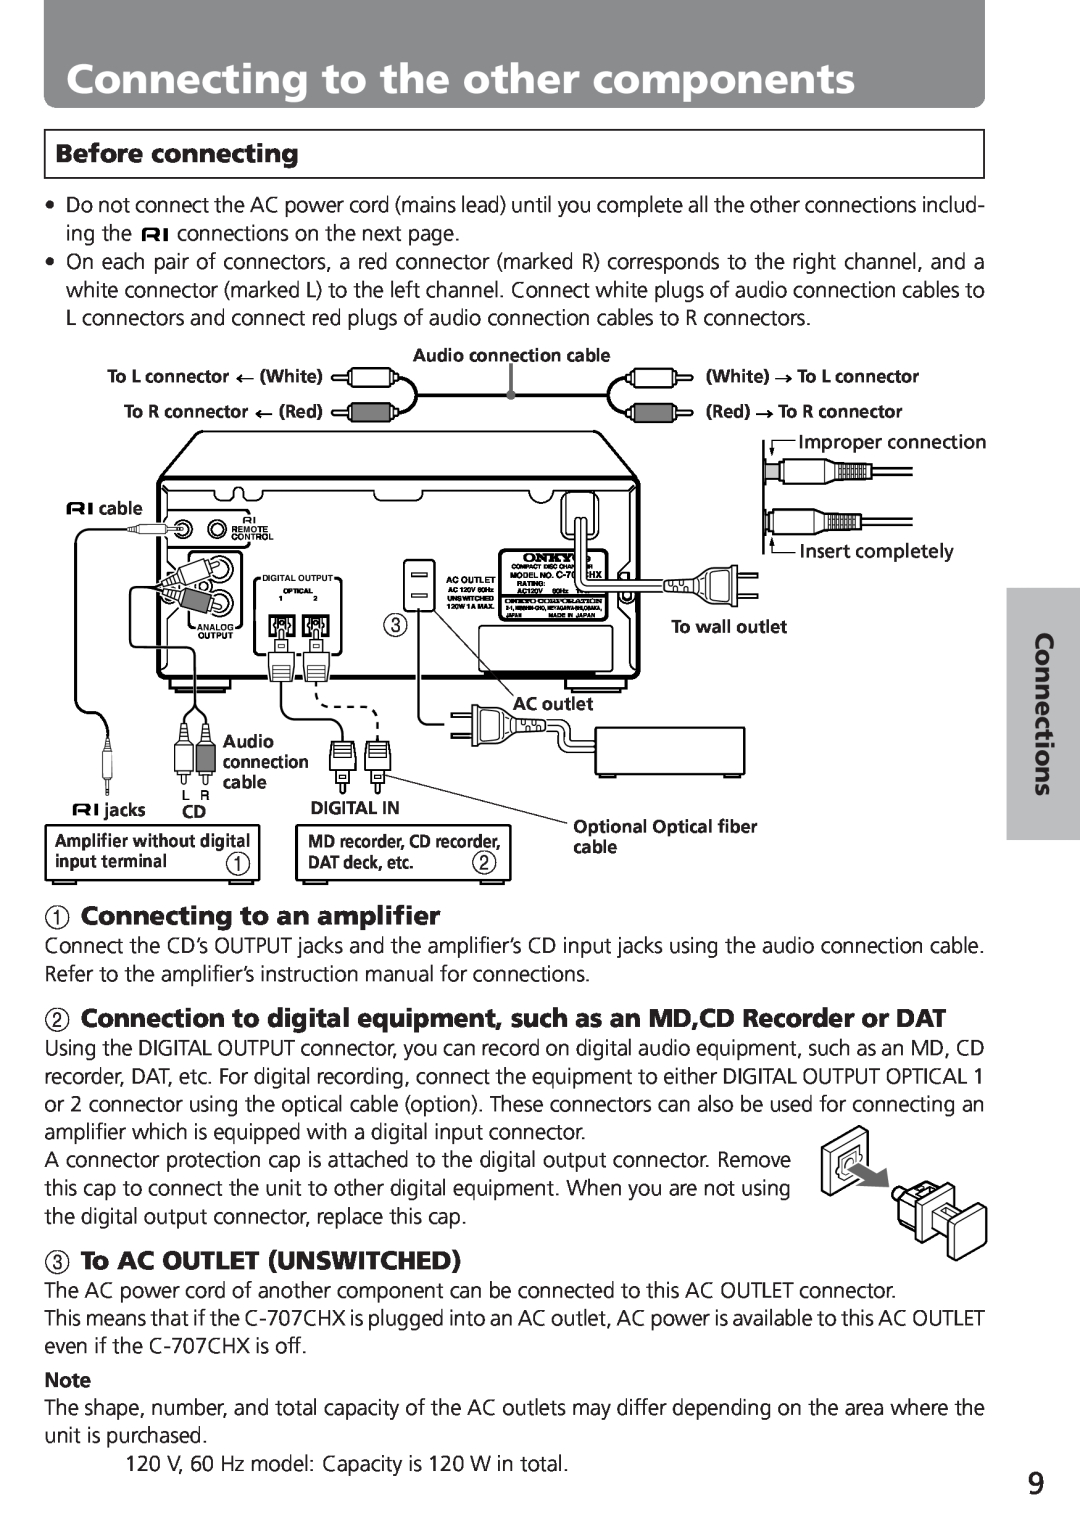 Onkyo C-707CHX instruction manual Connecting to the other components, Before connecting, 1Connecting to an amplifier 